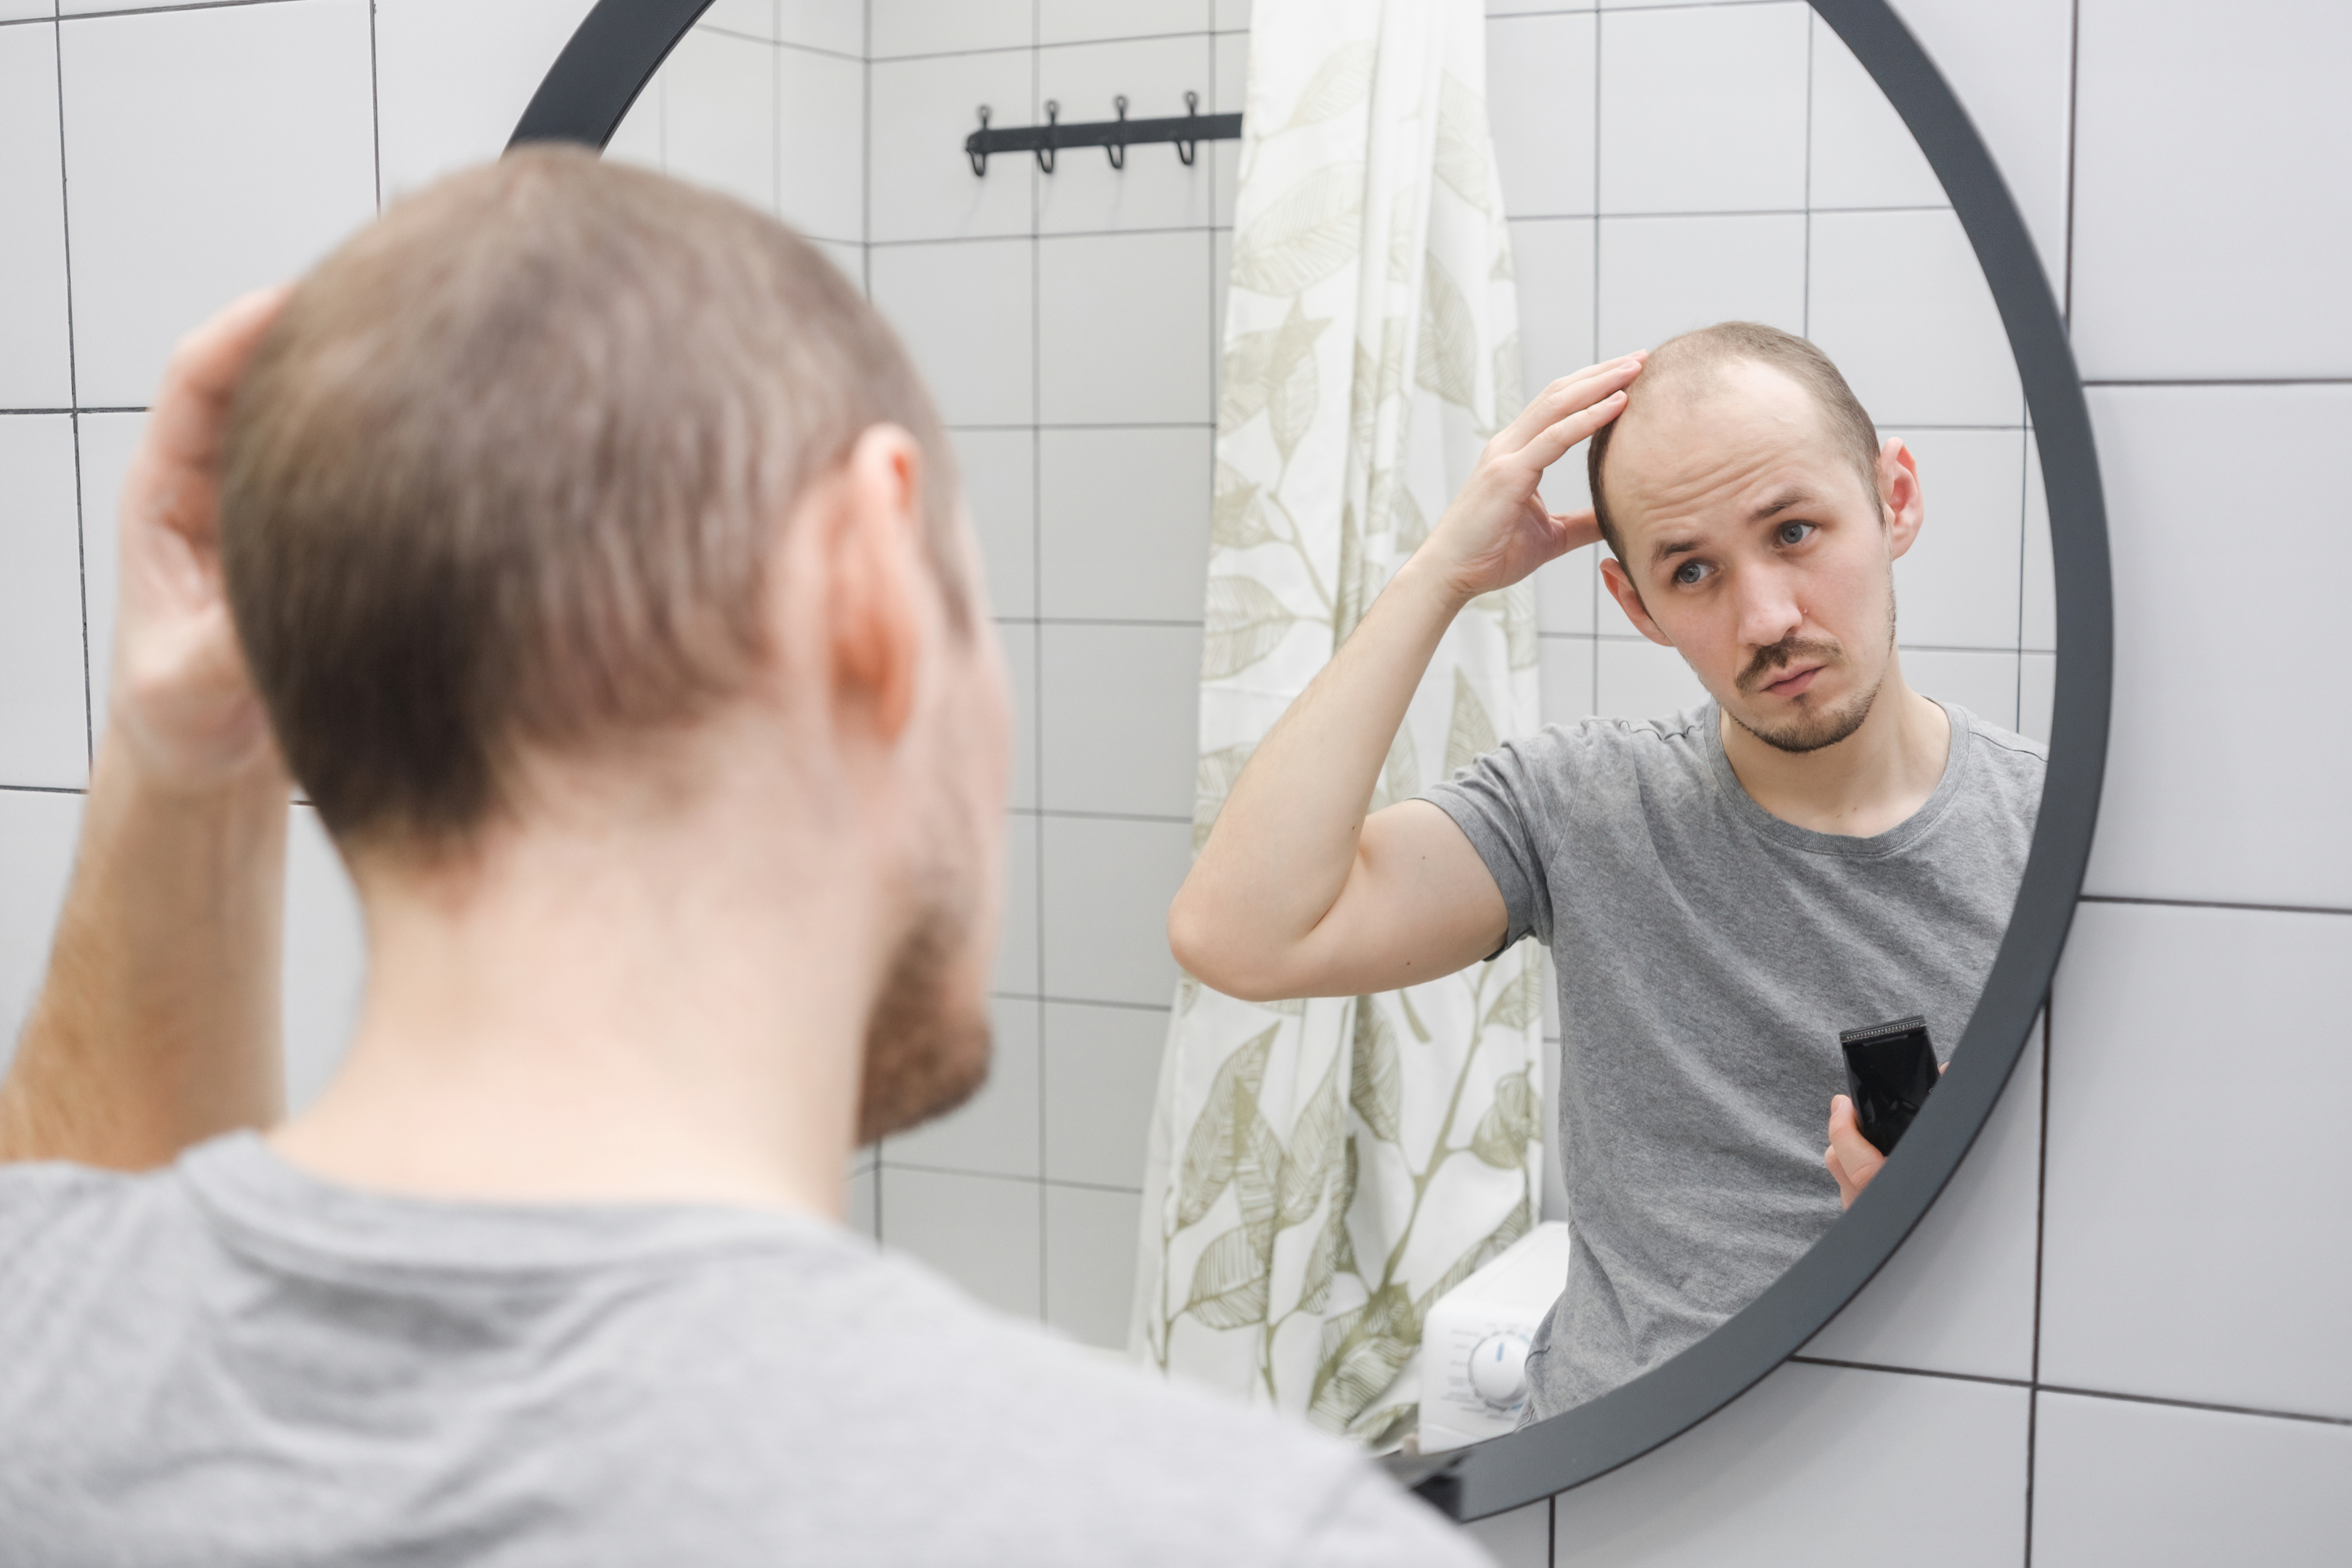 Thin hair at the hairline are a warning sign of receding hairline.